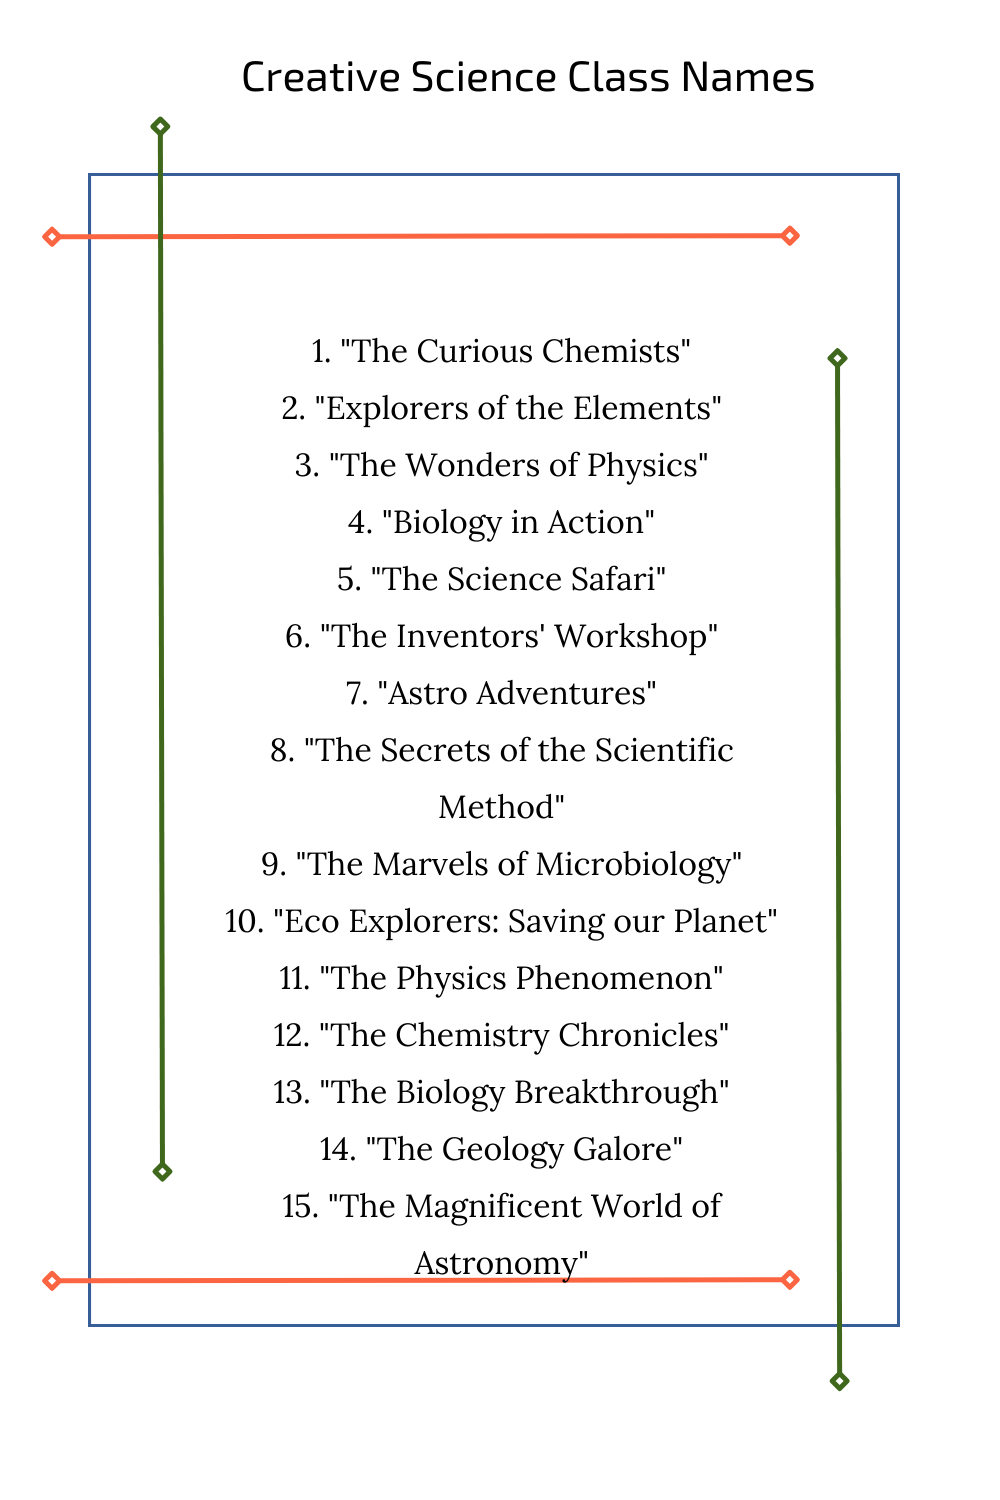 Creative Science Class Names